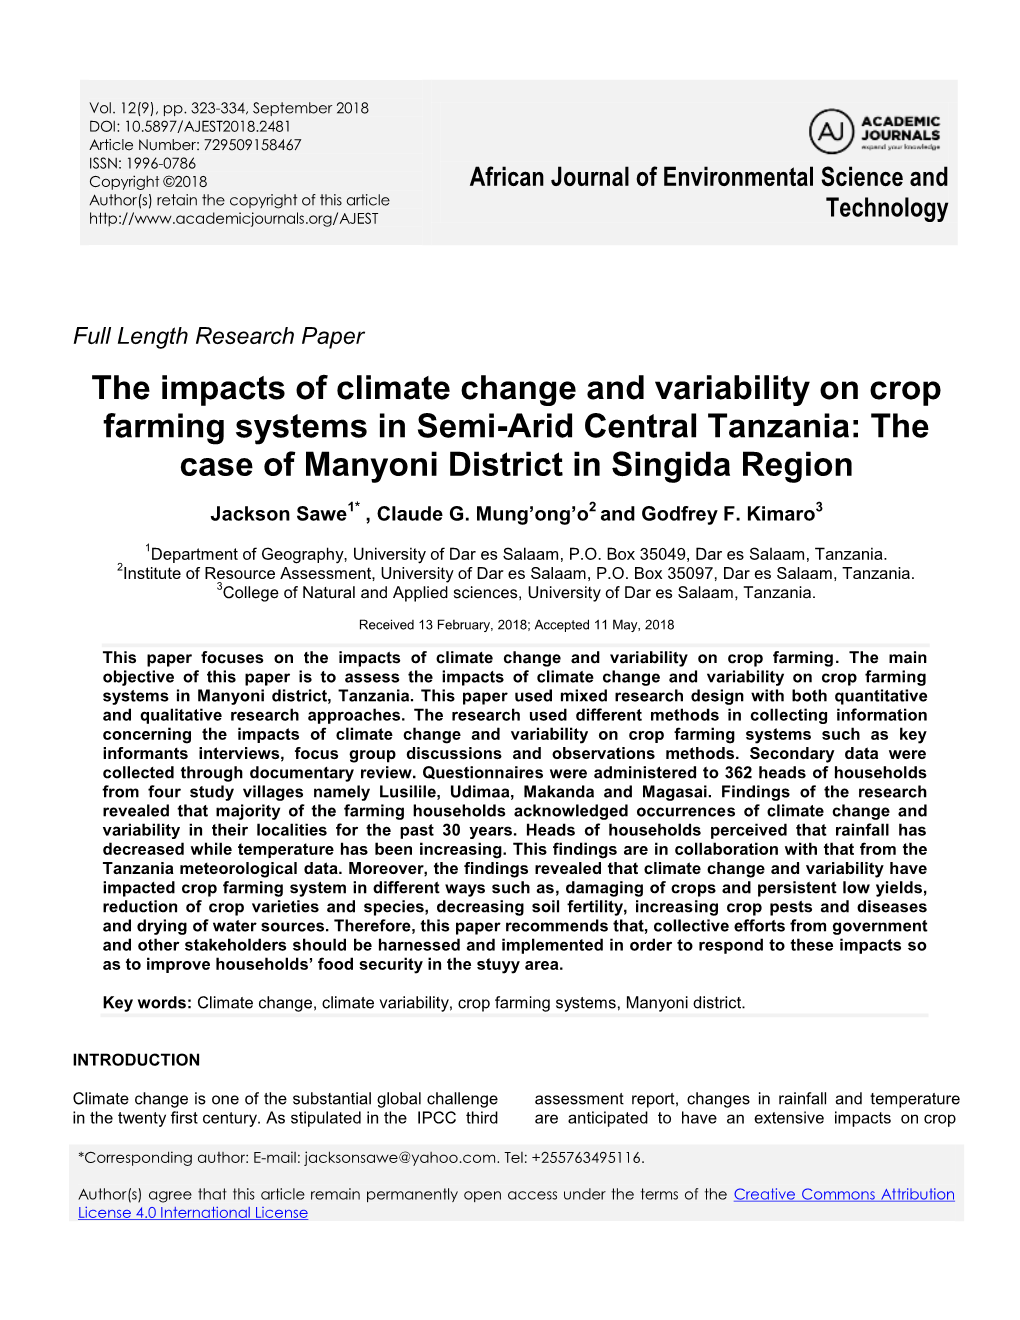 The Impacts of Climate Change and Variability on Crop Farming Systems in Semi-Arid Central Tanzania: the Case of Manyoni District in Singida Region